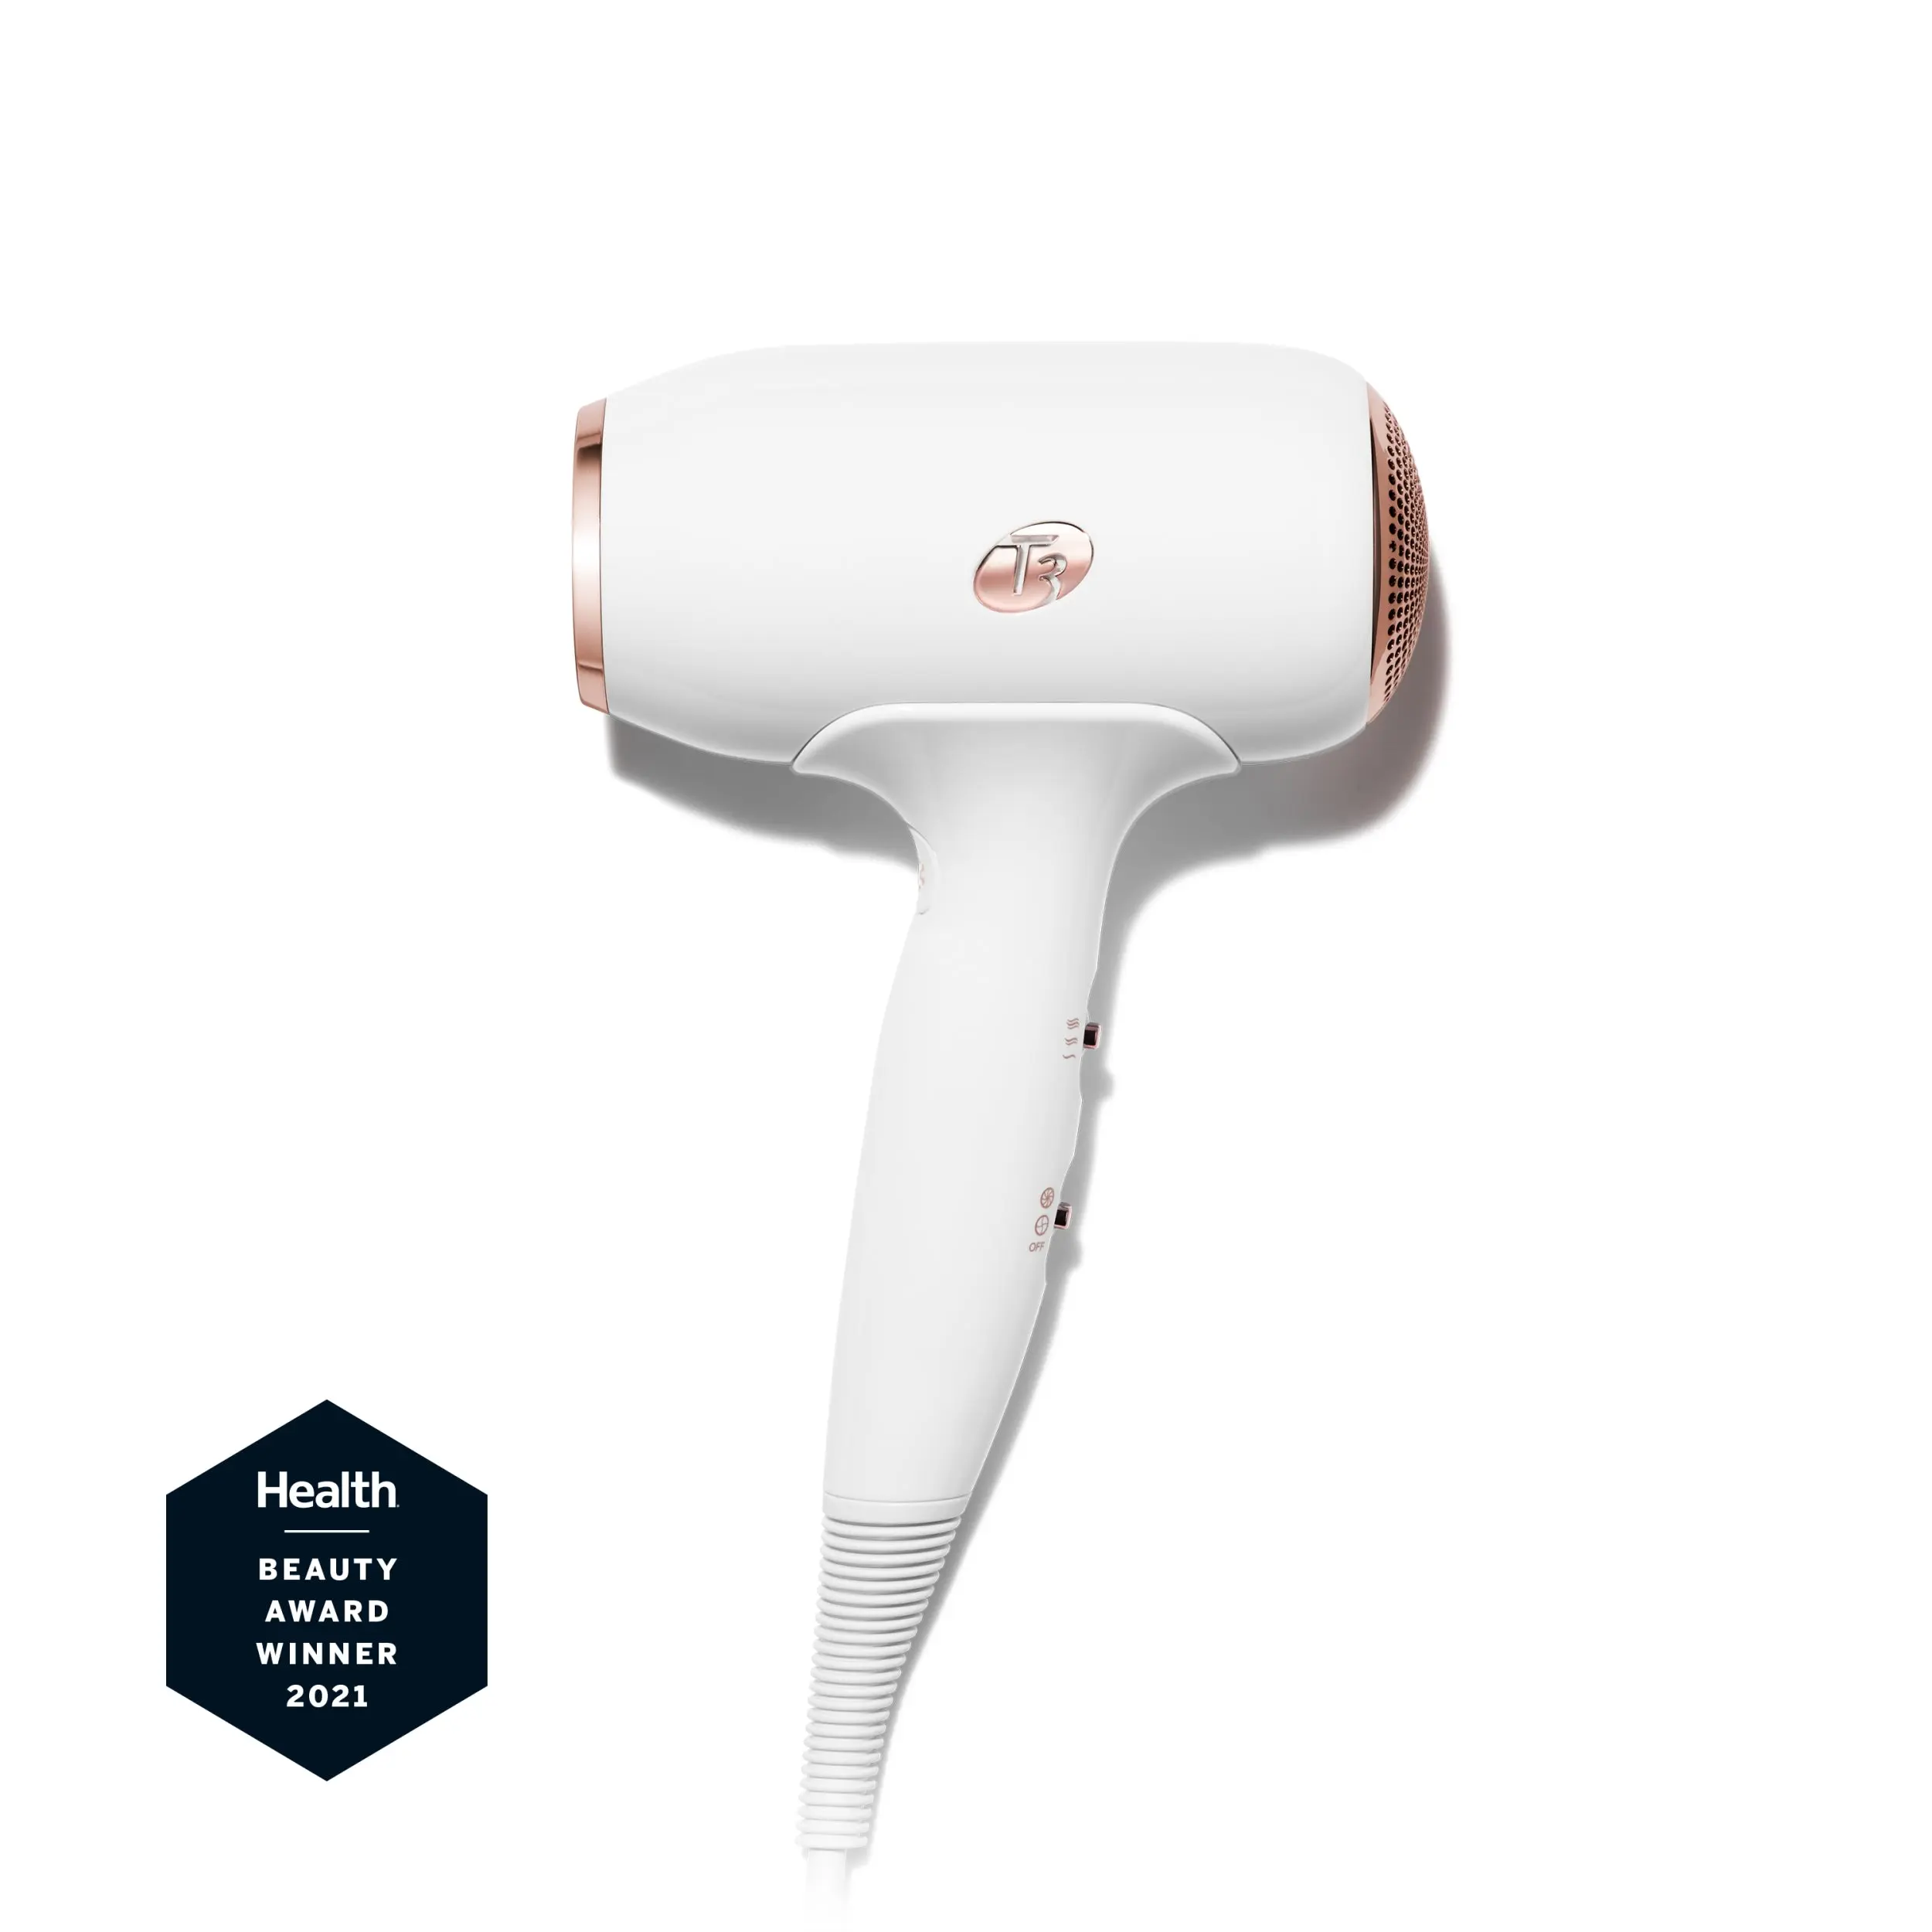 T3 fit compact hair dryer brush in white/rose gold